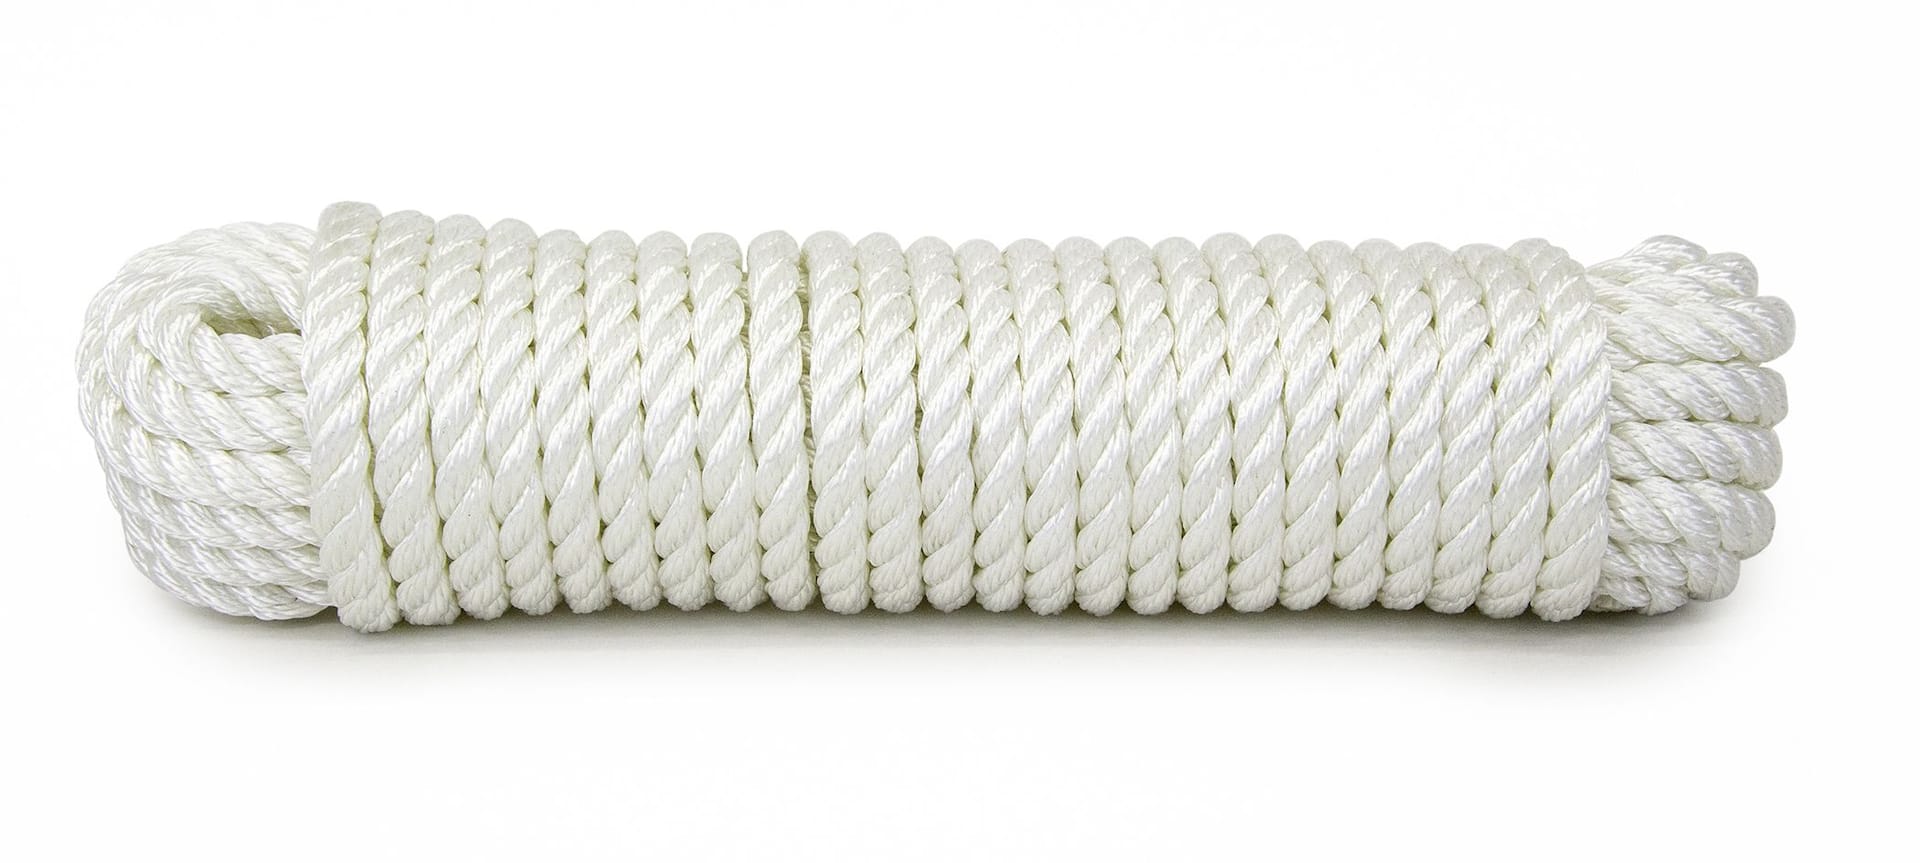 KingCord Nylon Twisted Rope, Strong and Flexible, Abrasion Resistance,  SWL-430-lbs, White, 1/2-in x 50-ft